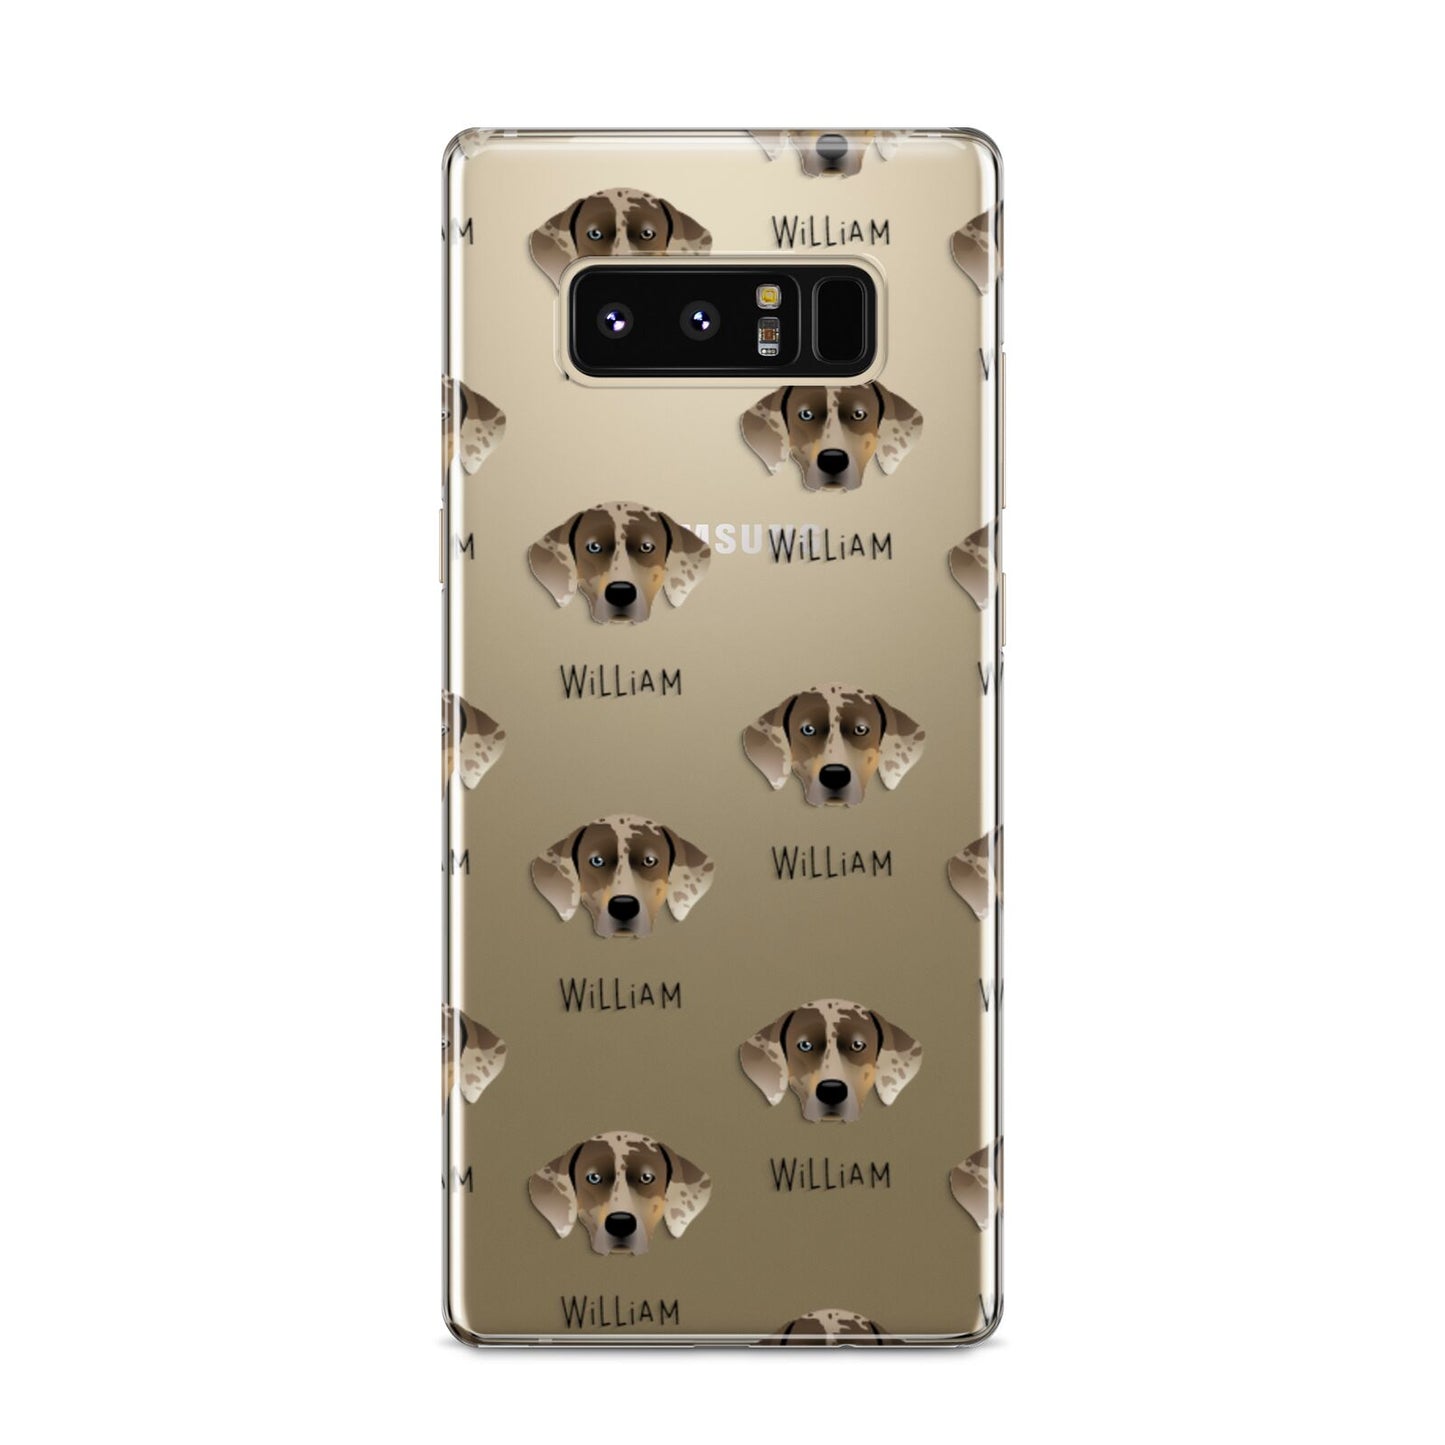 Catahoula Leopard Dog Icon with Name Samsung Galaxy S8 Case